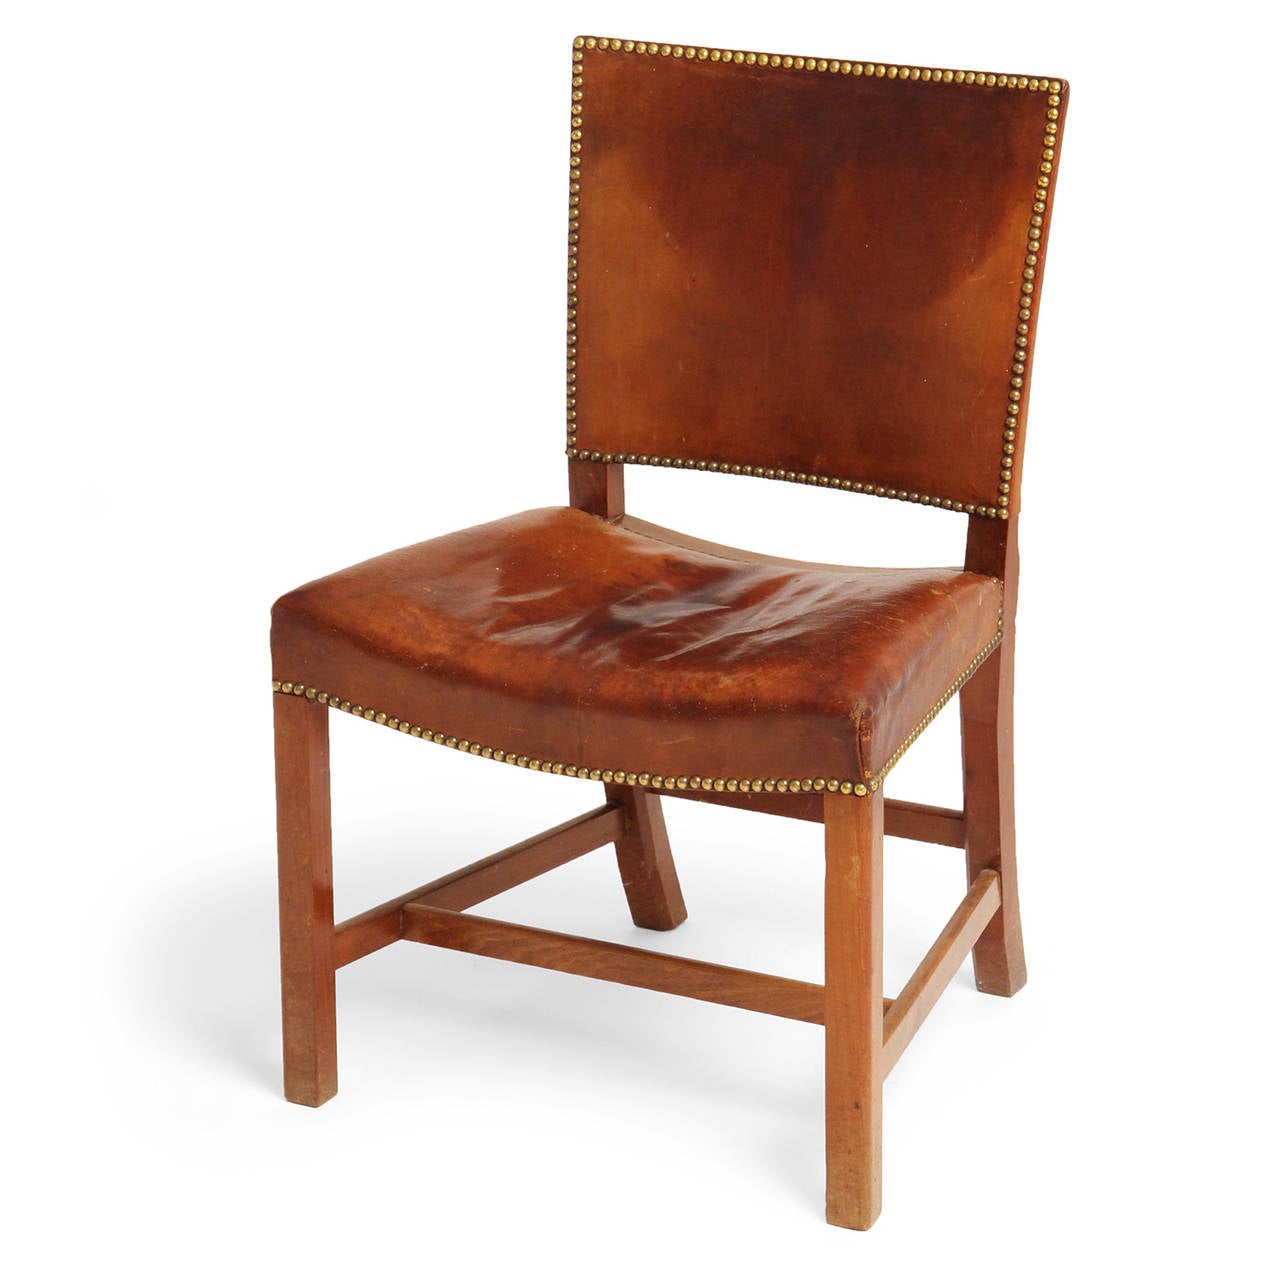 A Cuban mahogany 'Barcelona' dining chair designed by Kaare Klint featuring the original natural leather upholstery. Originally introduced at the 1929 International Exposition in Barcelona, Spain. Made by Rud Rasmussen in Denmark, circa 1930s.